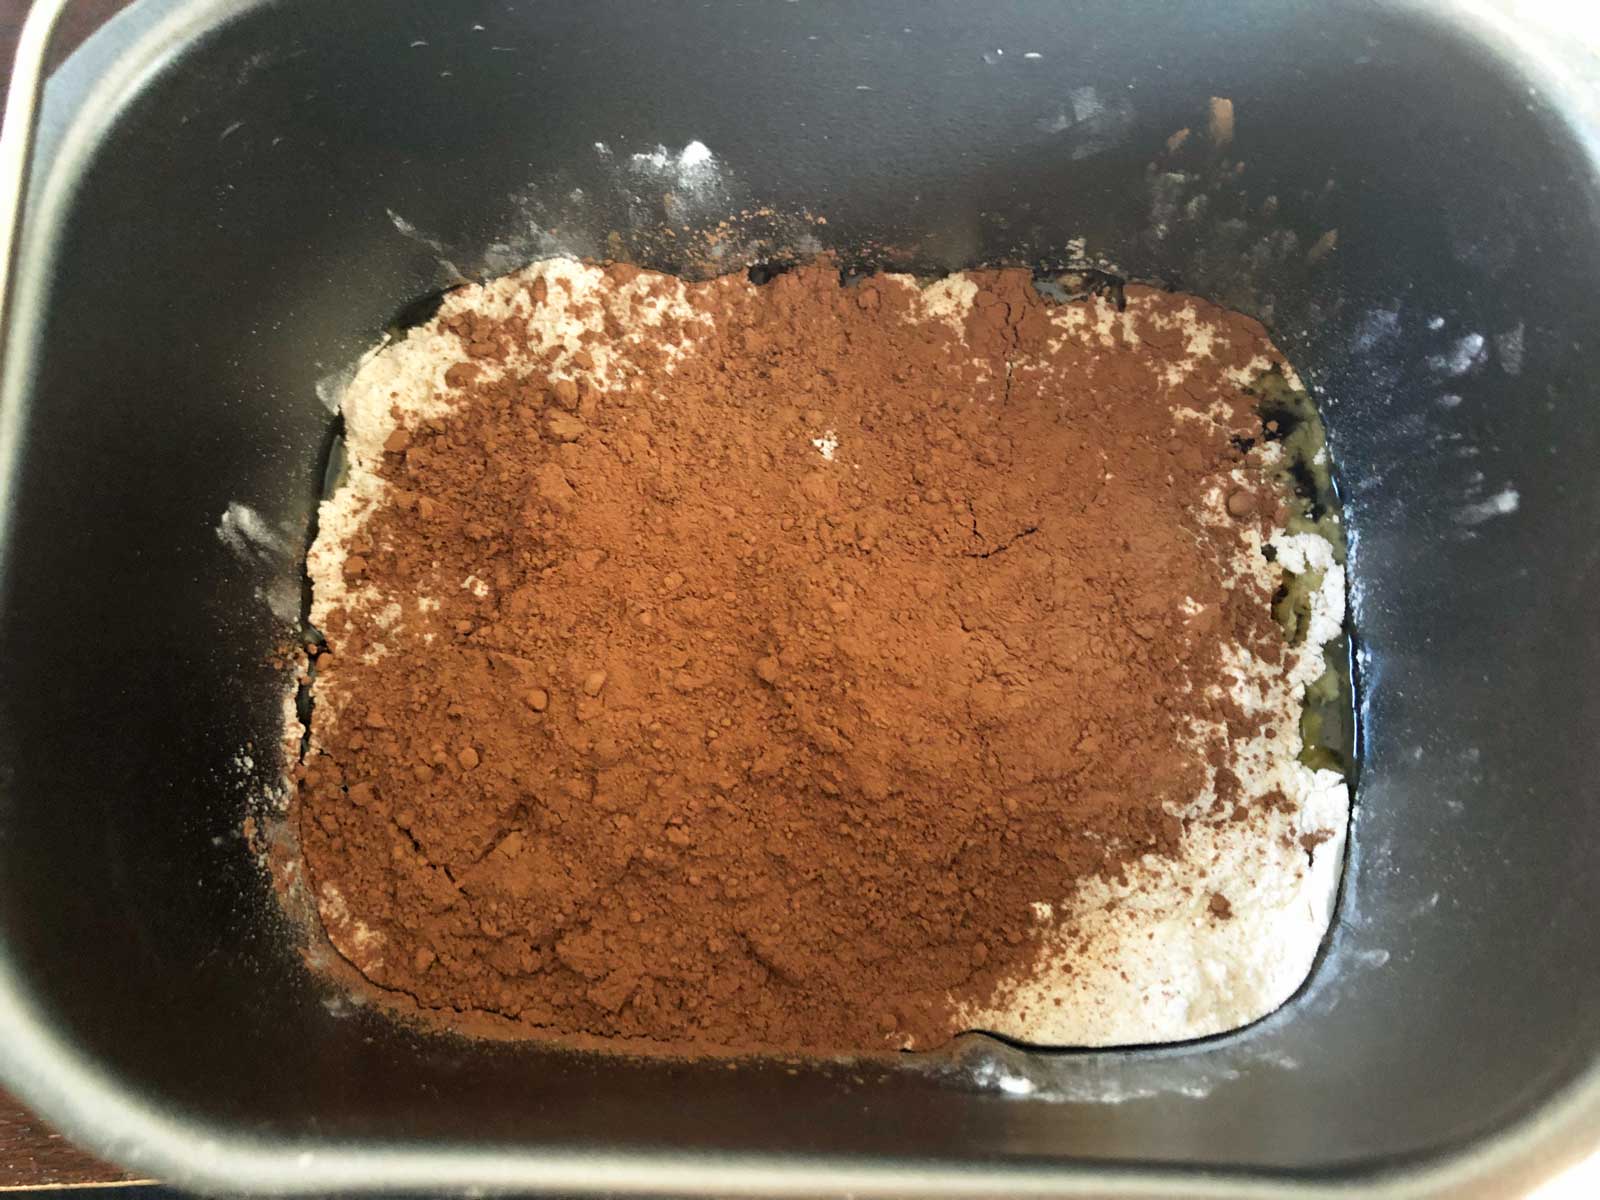 Chocolate cake ingredients in a bread machine.